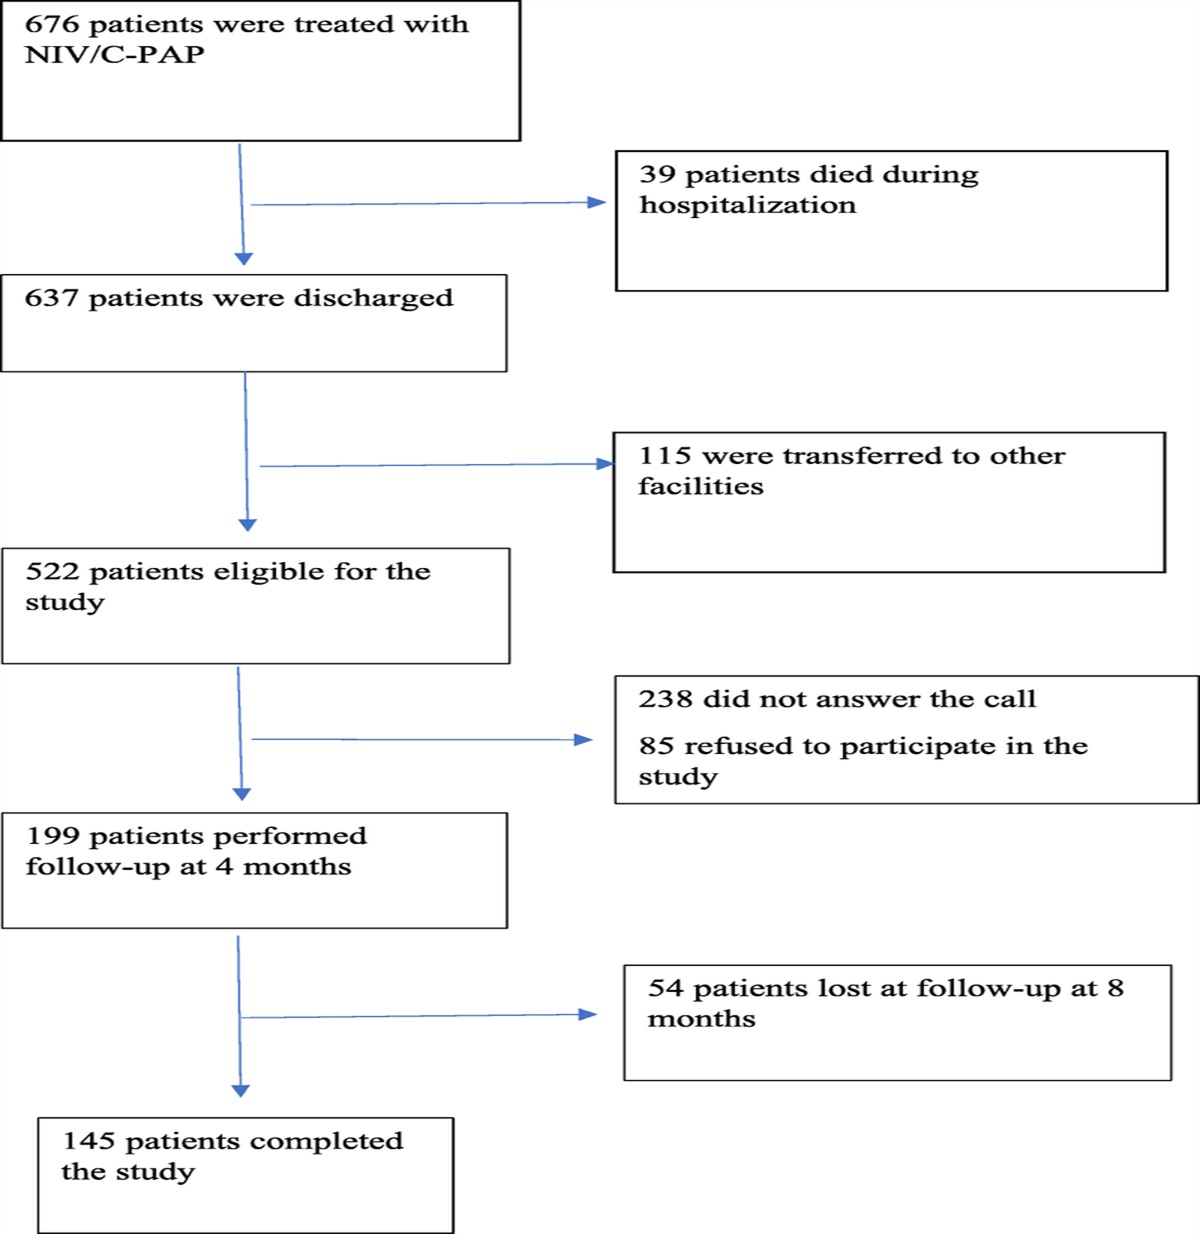 Impact of COVID-19 on Quality of Life After Hospital Discharge in Patients Treated With Noninvasive Ventilation/Continuous Positive Airway Pressure: An Observational, Prospective Multicenter Study